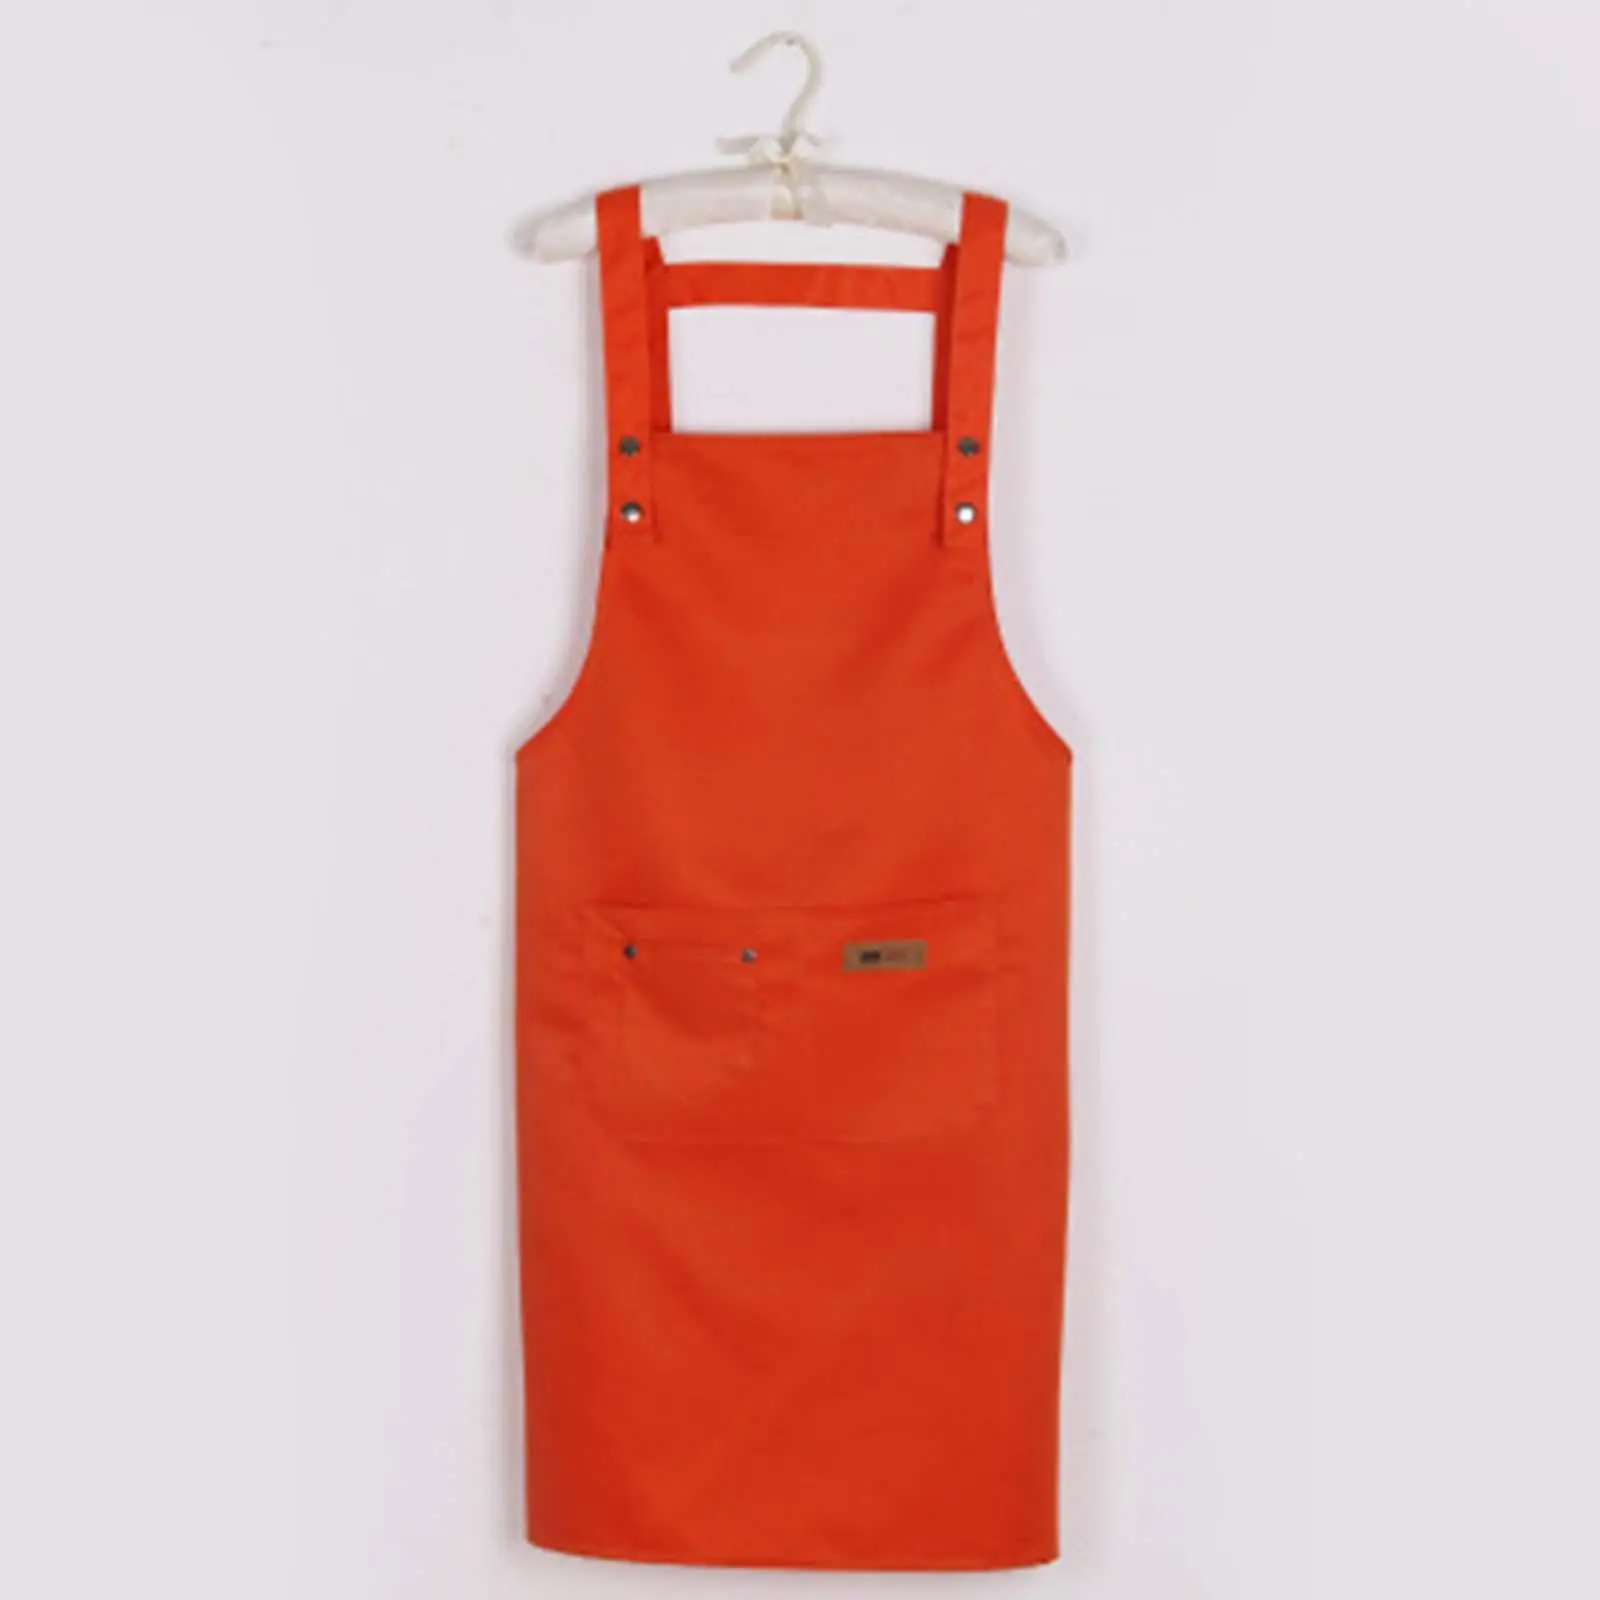 Adjustable Apron Stylist Apron Chef Apron Barber Apron Bib Apron Art Apron for Gardening Baking Painting Cooking Coffee House